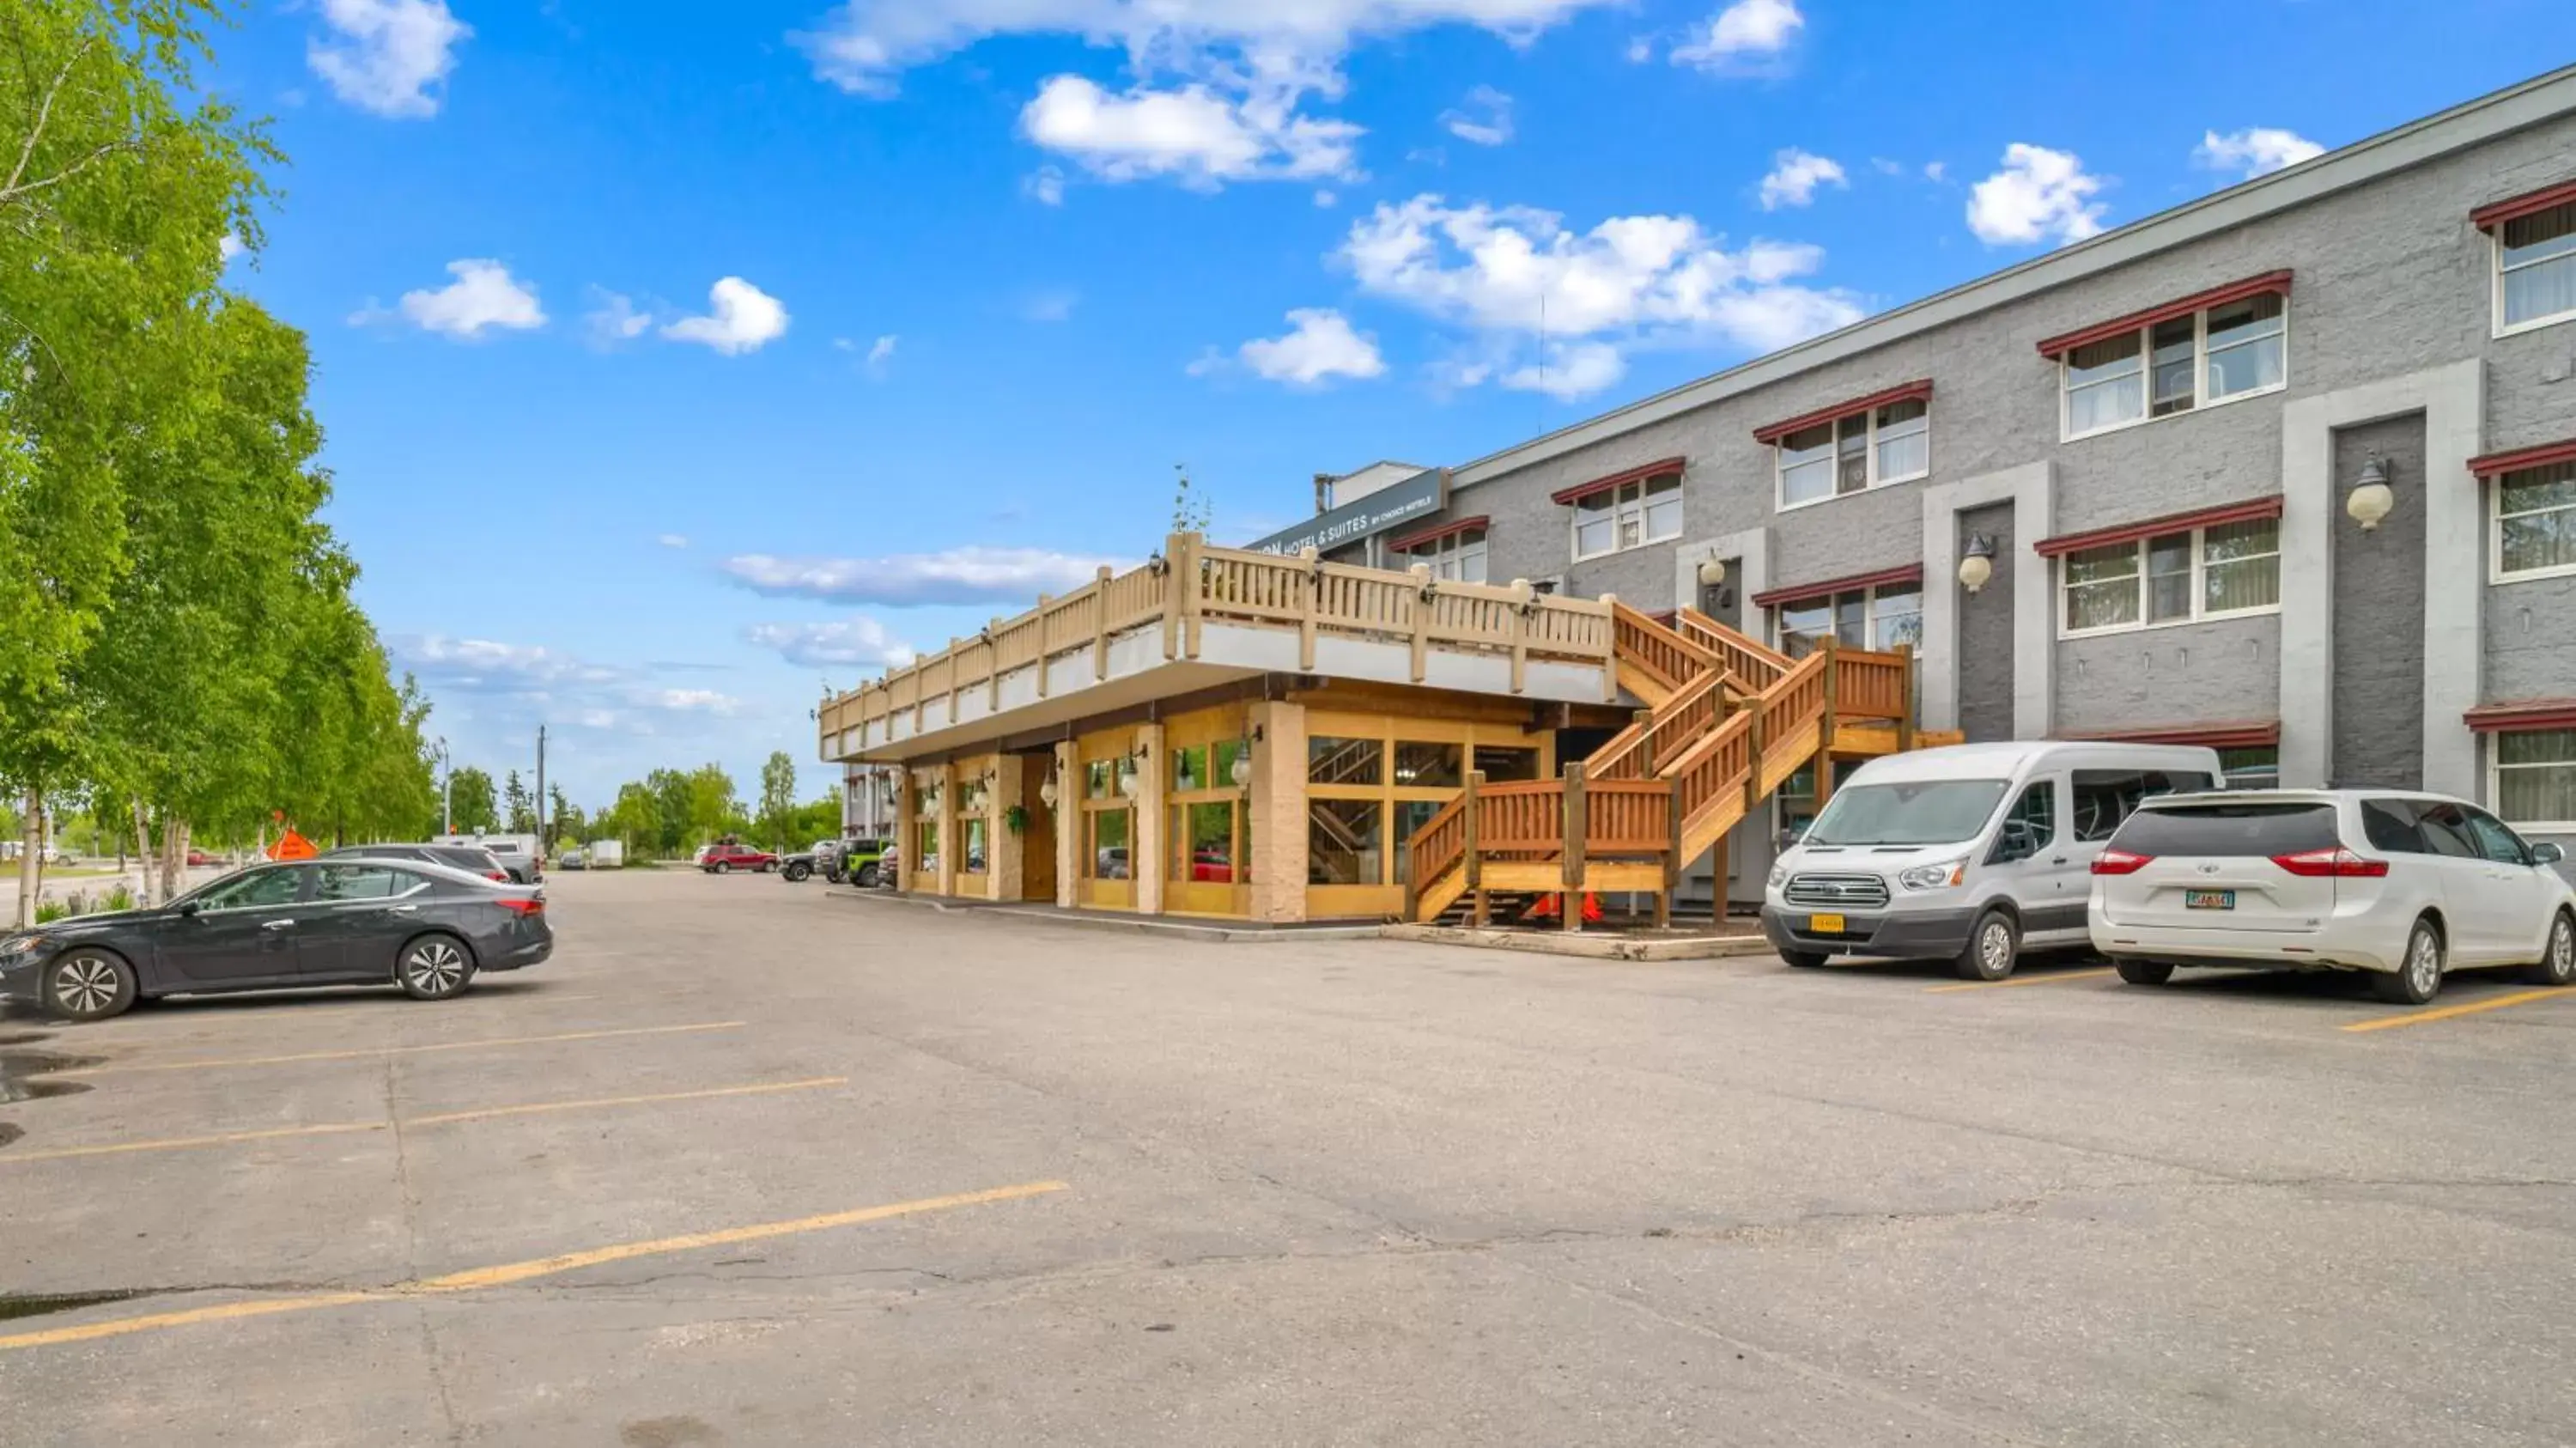 Property Building in Clarion Hotel & Suites Fairbanks near Ft. Wainwright